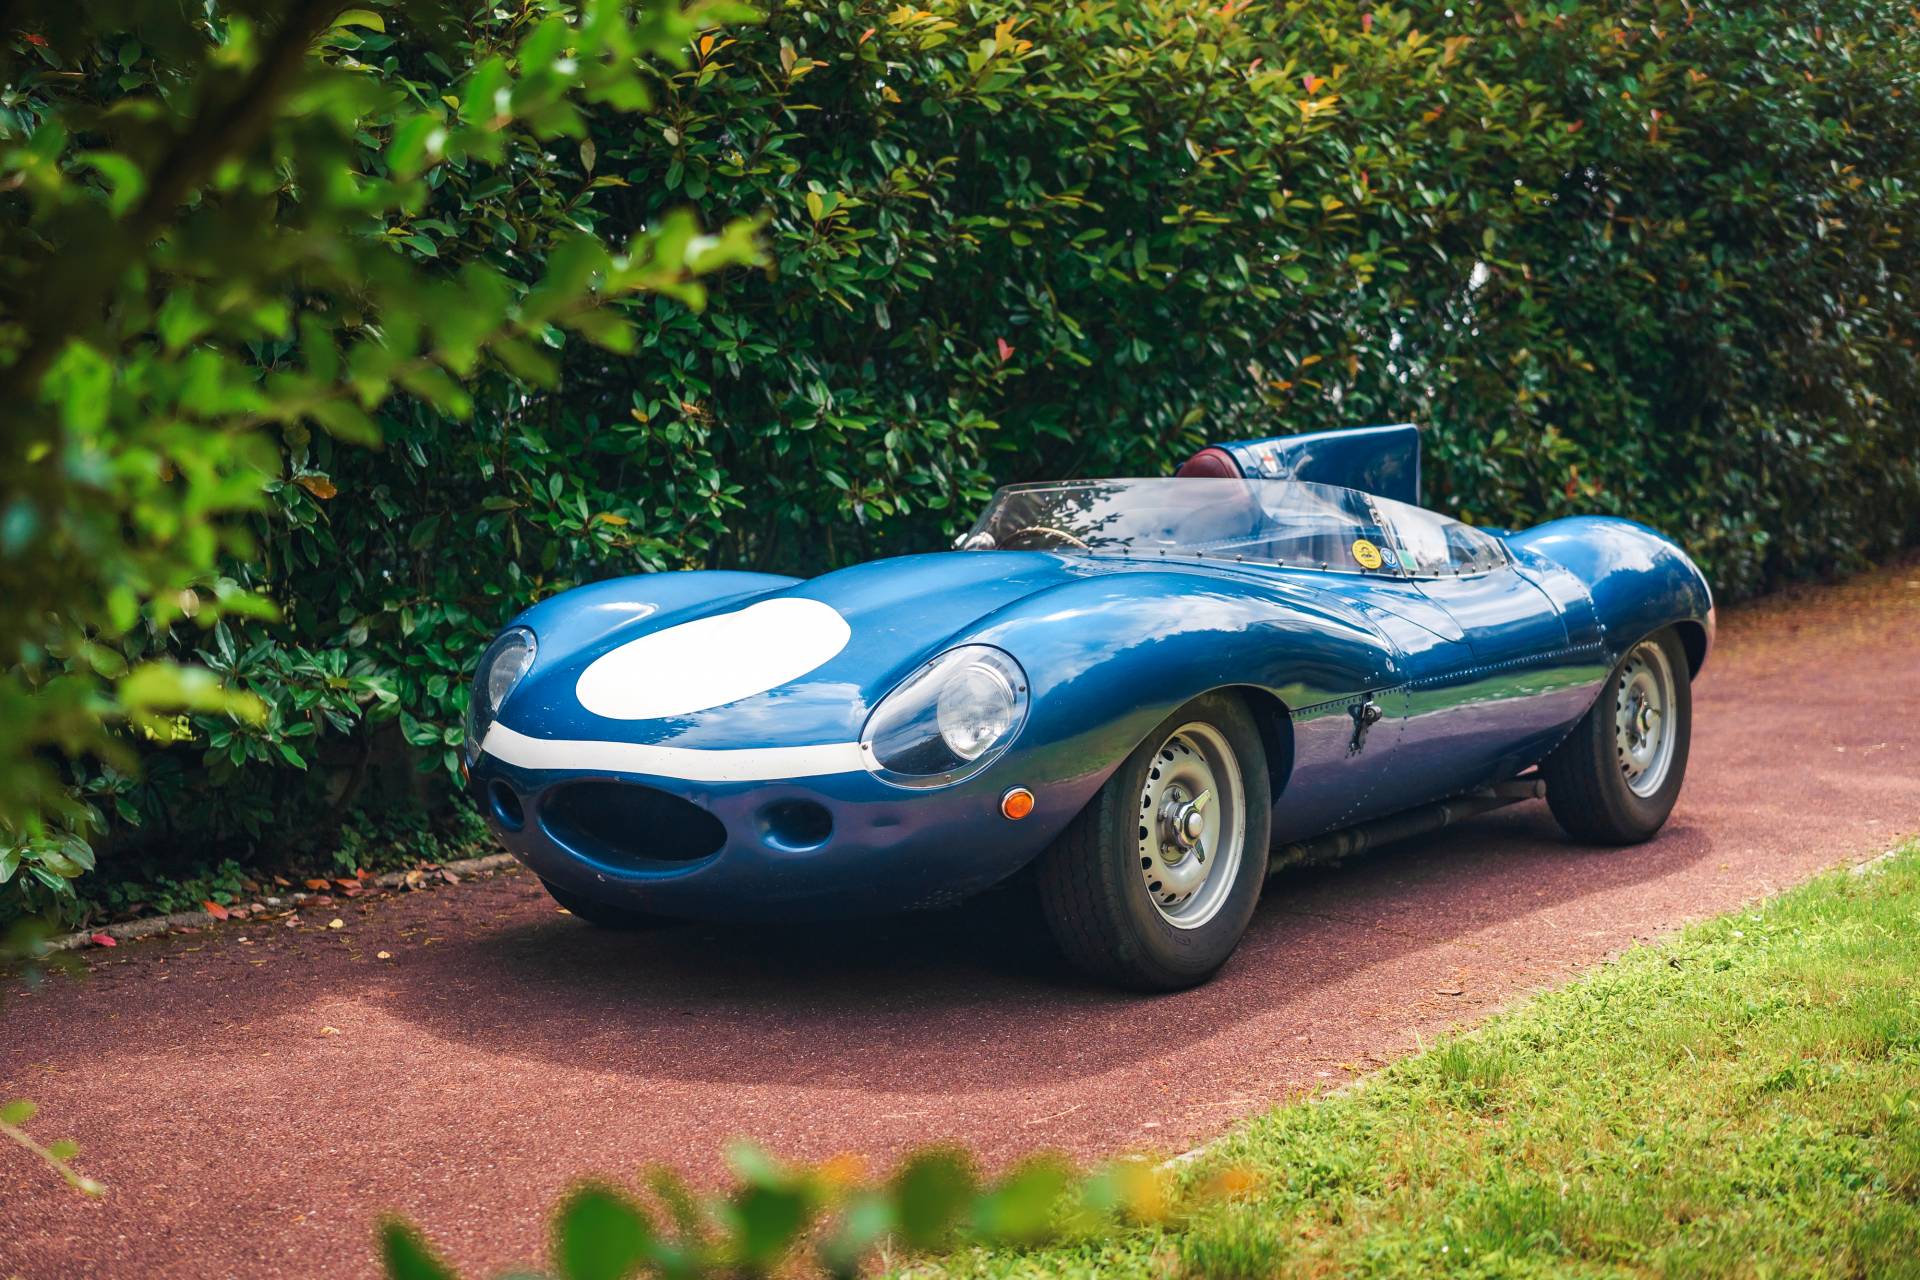 For Sale: Deetype D-Type (1979) offered for €180,000